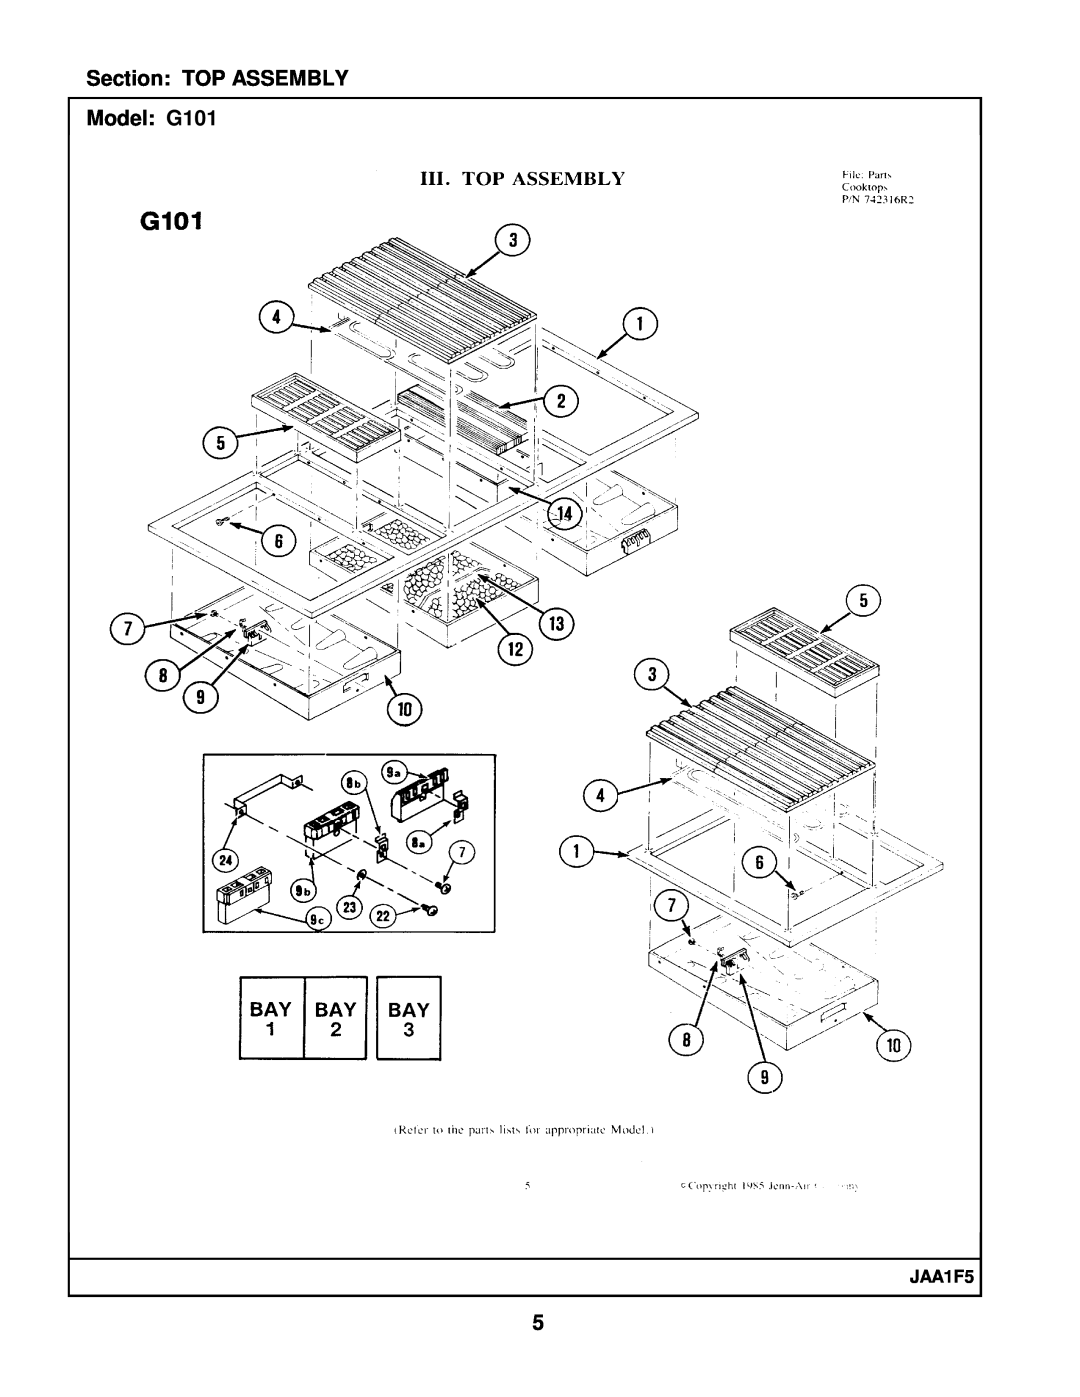 Whirlpool manual Section TOP ASSEMBLY Model G101, JAA1F5 